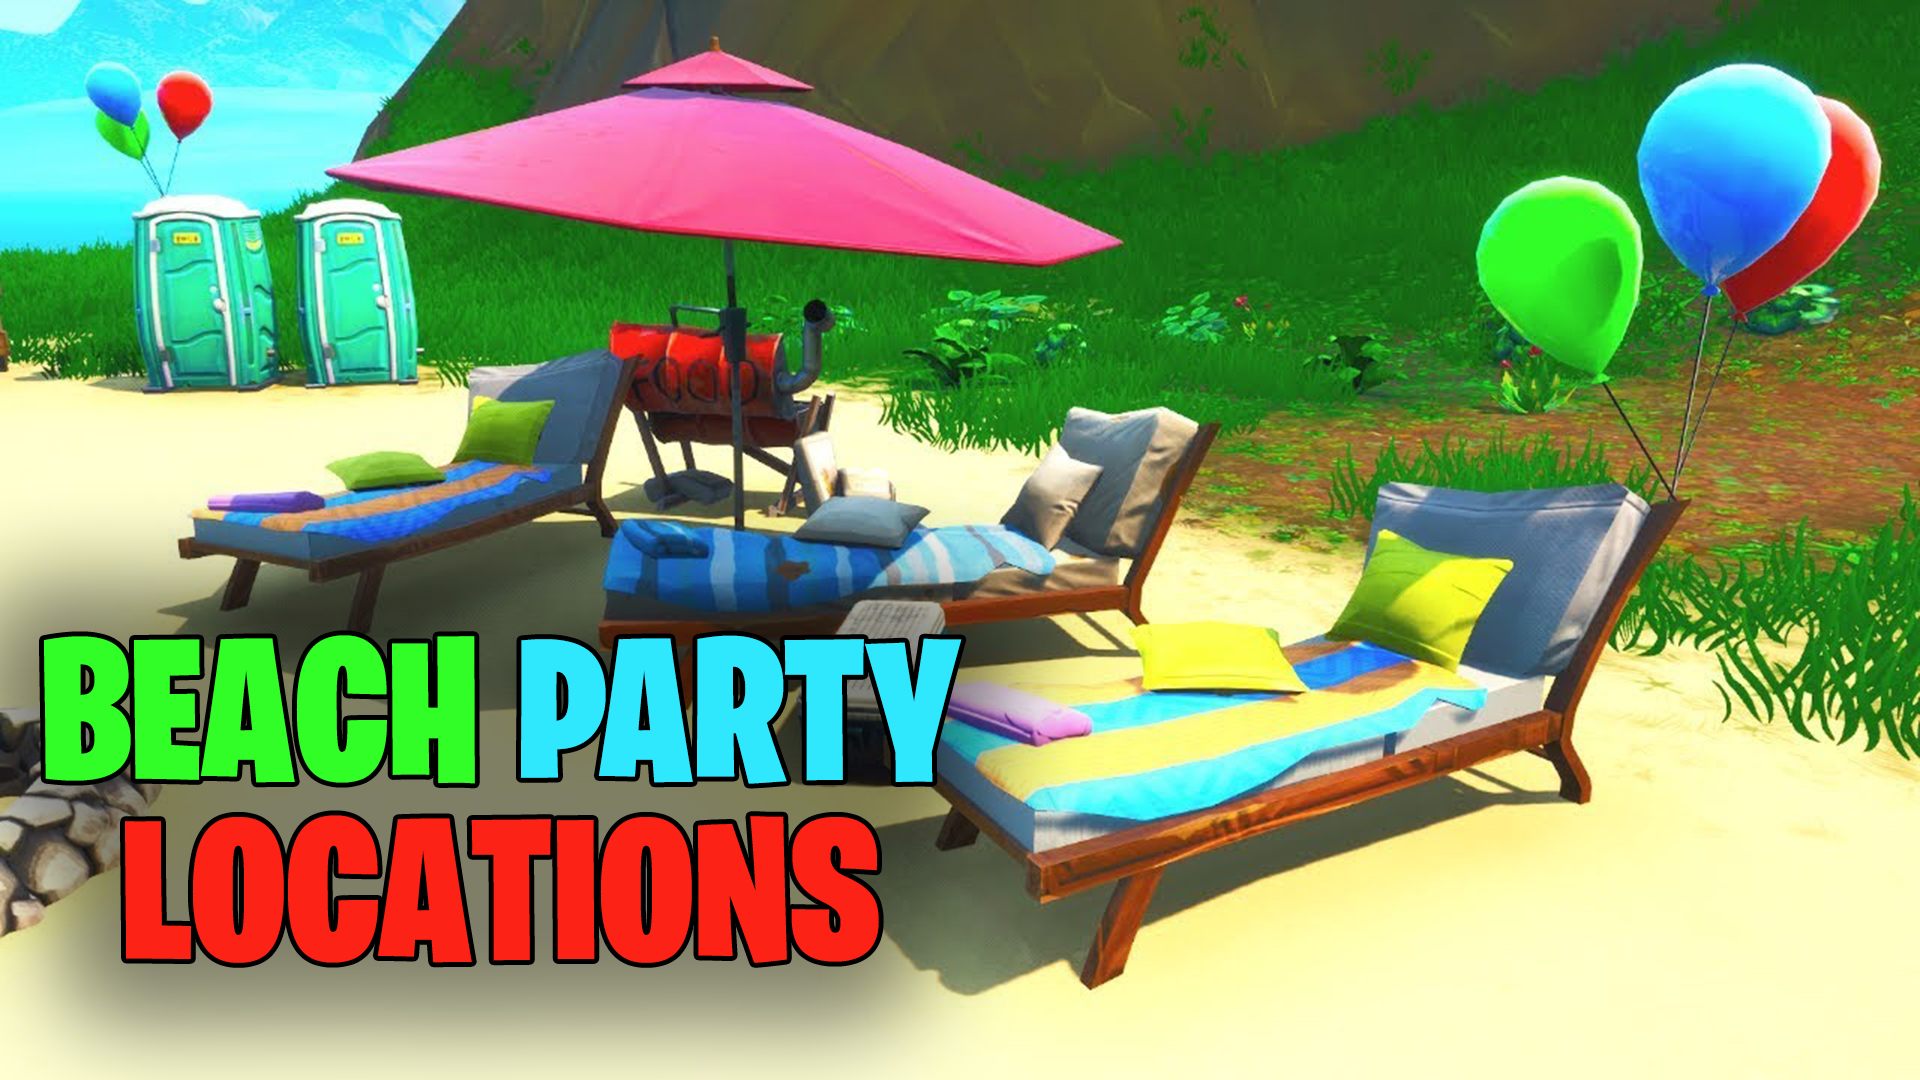 Fortnite Beach Party Locations Ftr - Beach Party In Fortnite - HD Wallpaper 